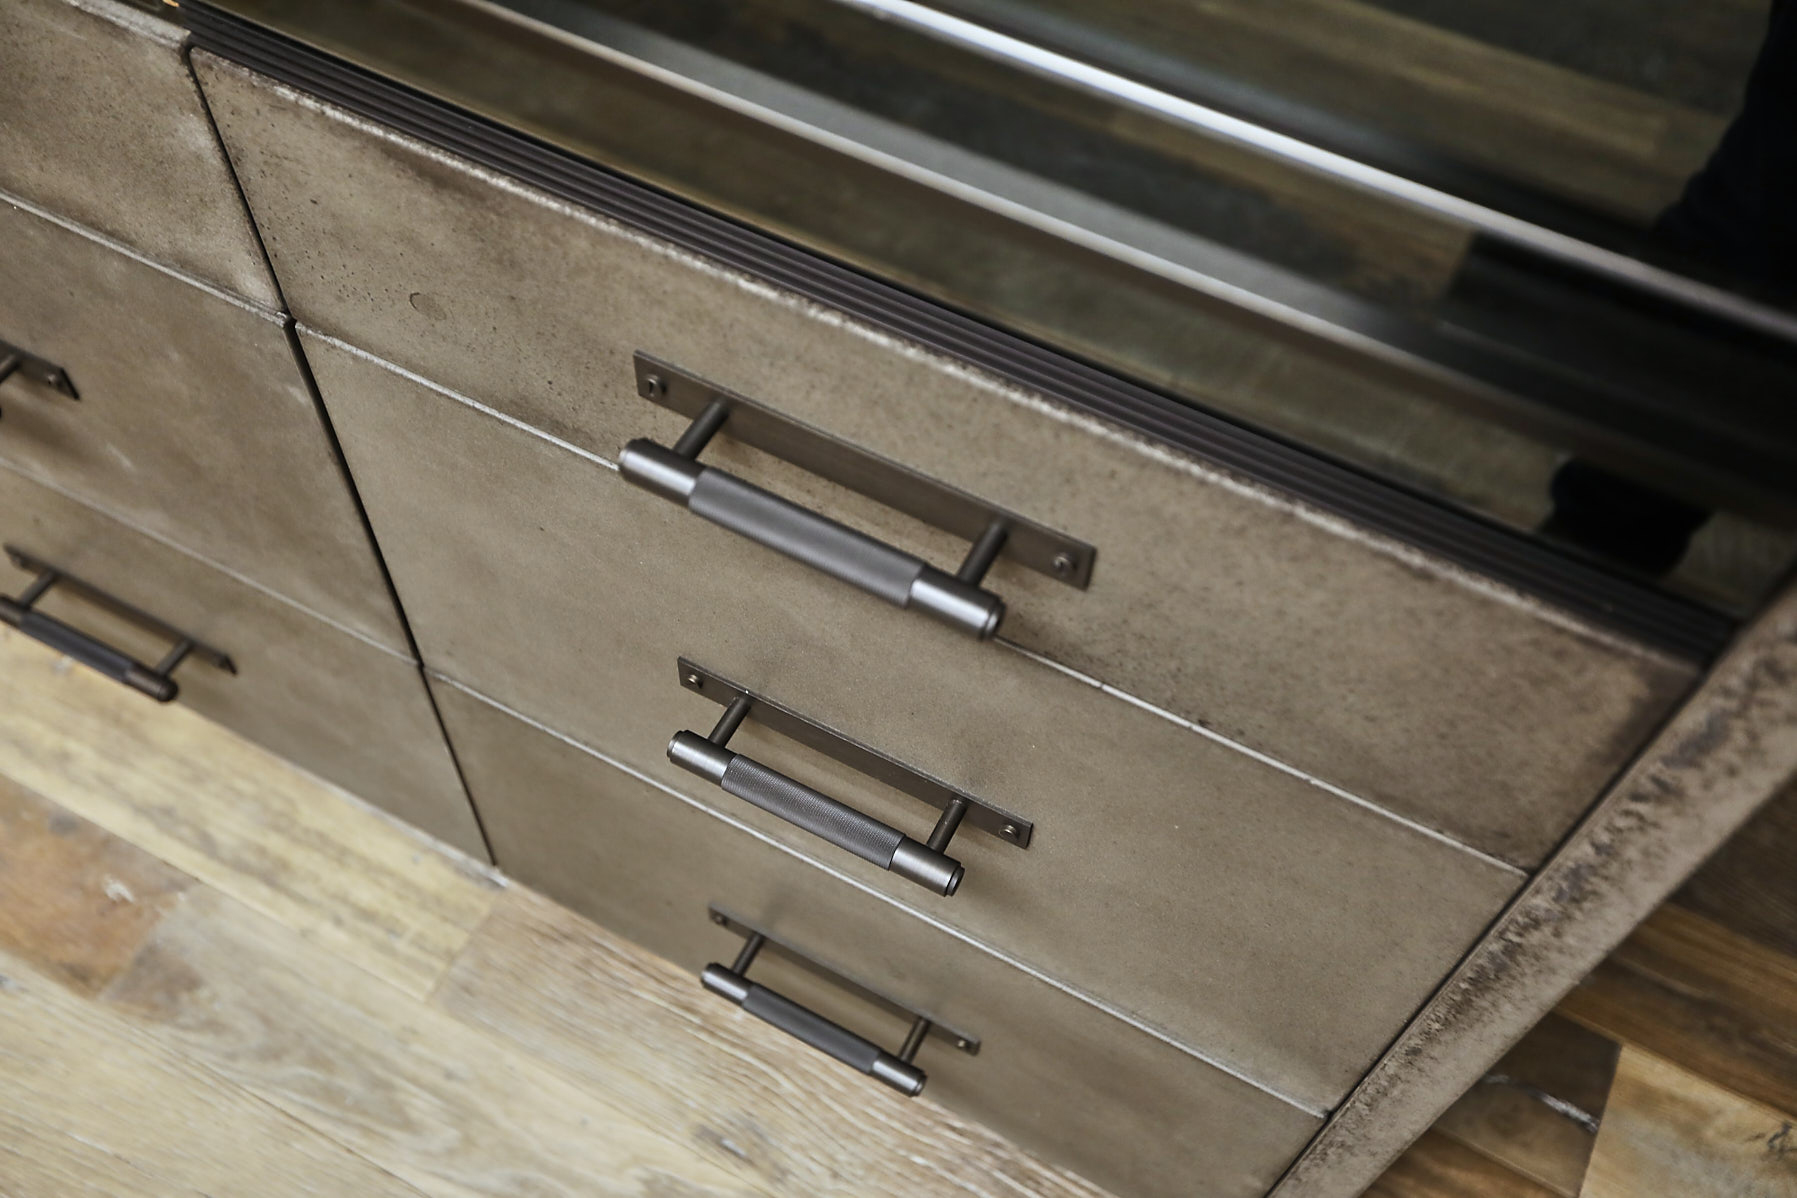 Solid concrete drawer fronts with buster and punch pull handles